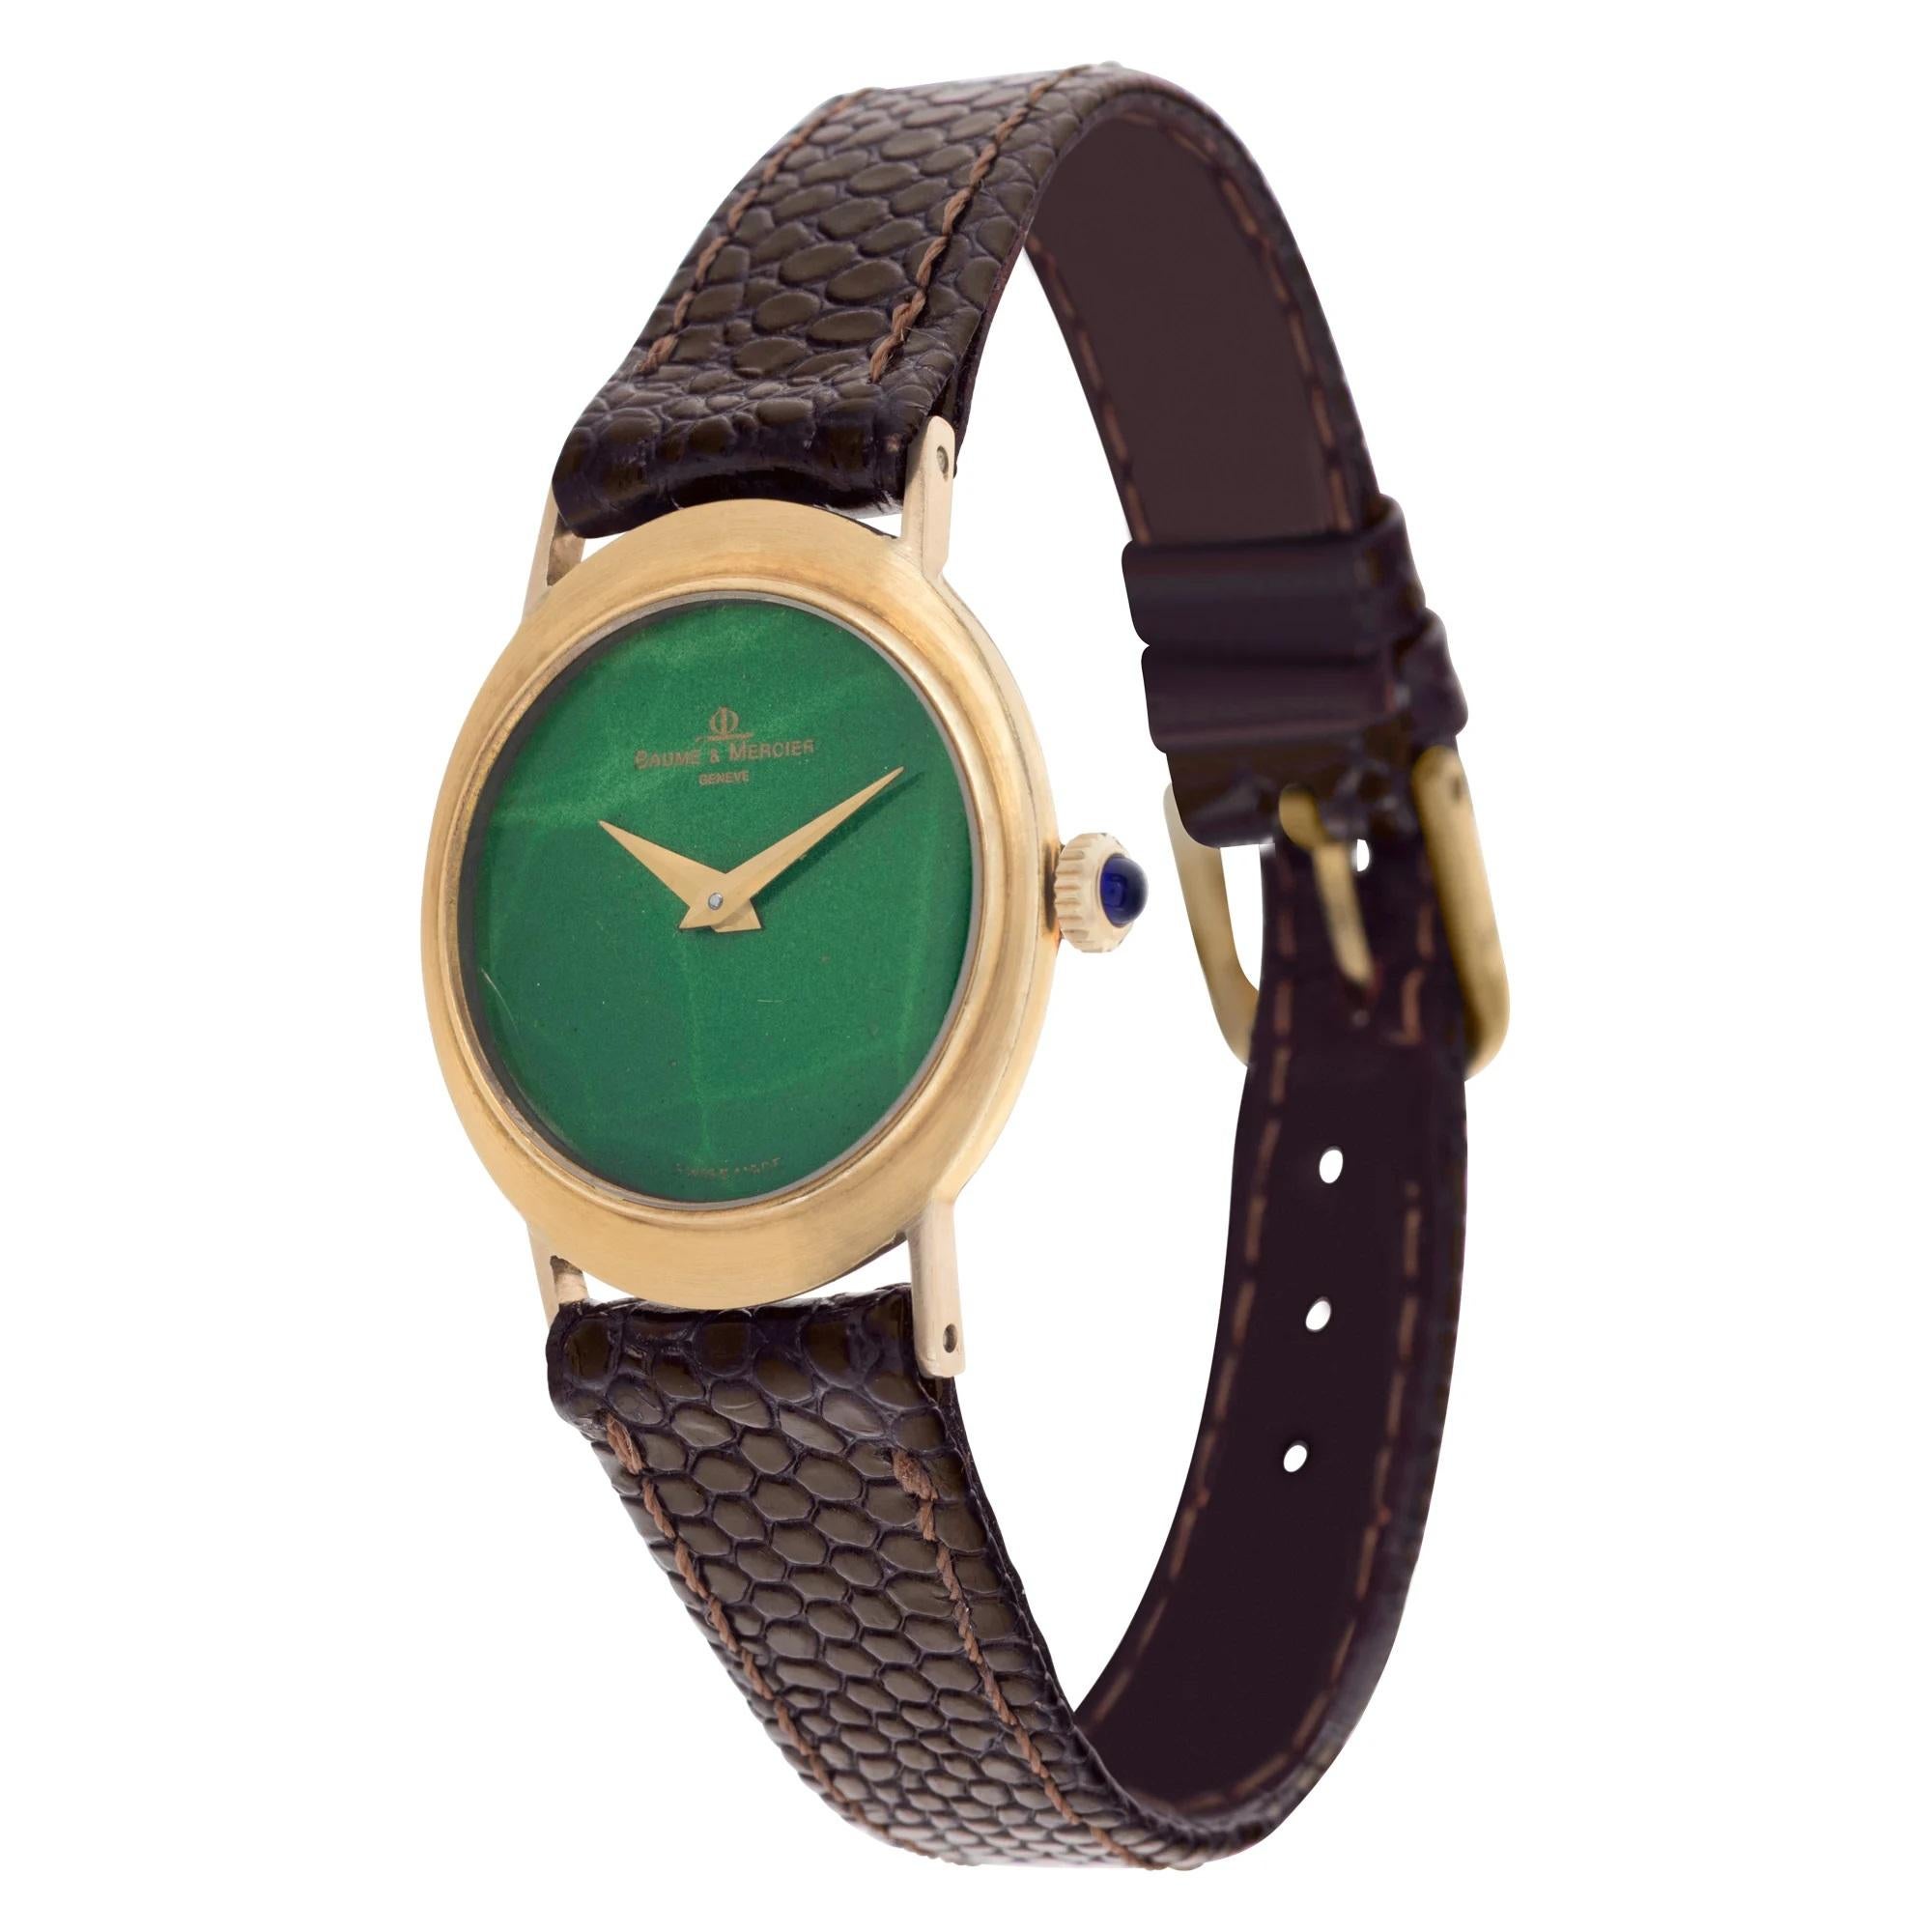 Vintage Baume & Mercier in 18k with green malachite dial. Manual wind. Case size 26.5 mm x 24 mm. Ref 374452. Fine Pre-owned Baume & Mercier Watch.

Certified preowned Vintage Baume & Mercier 374452 watch is made out of yellow gold on a Brown Lizard